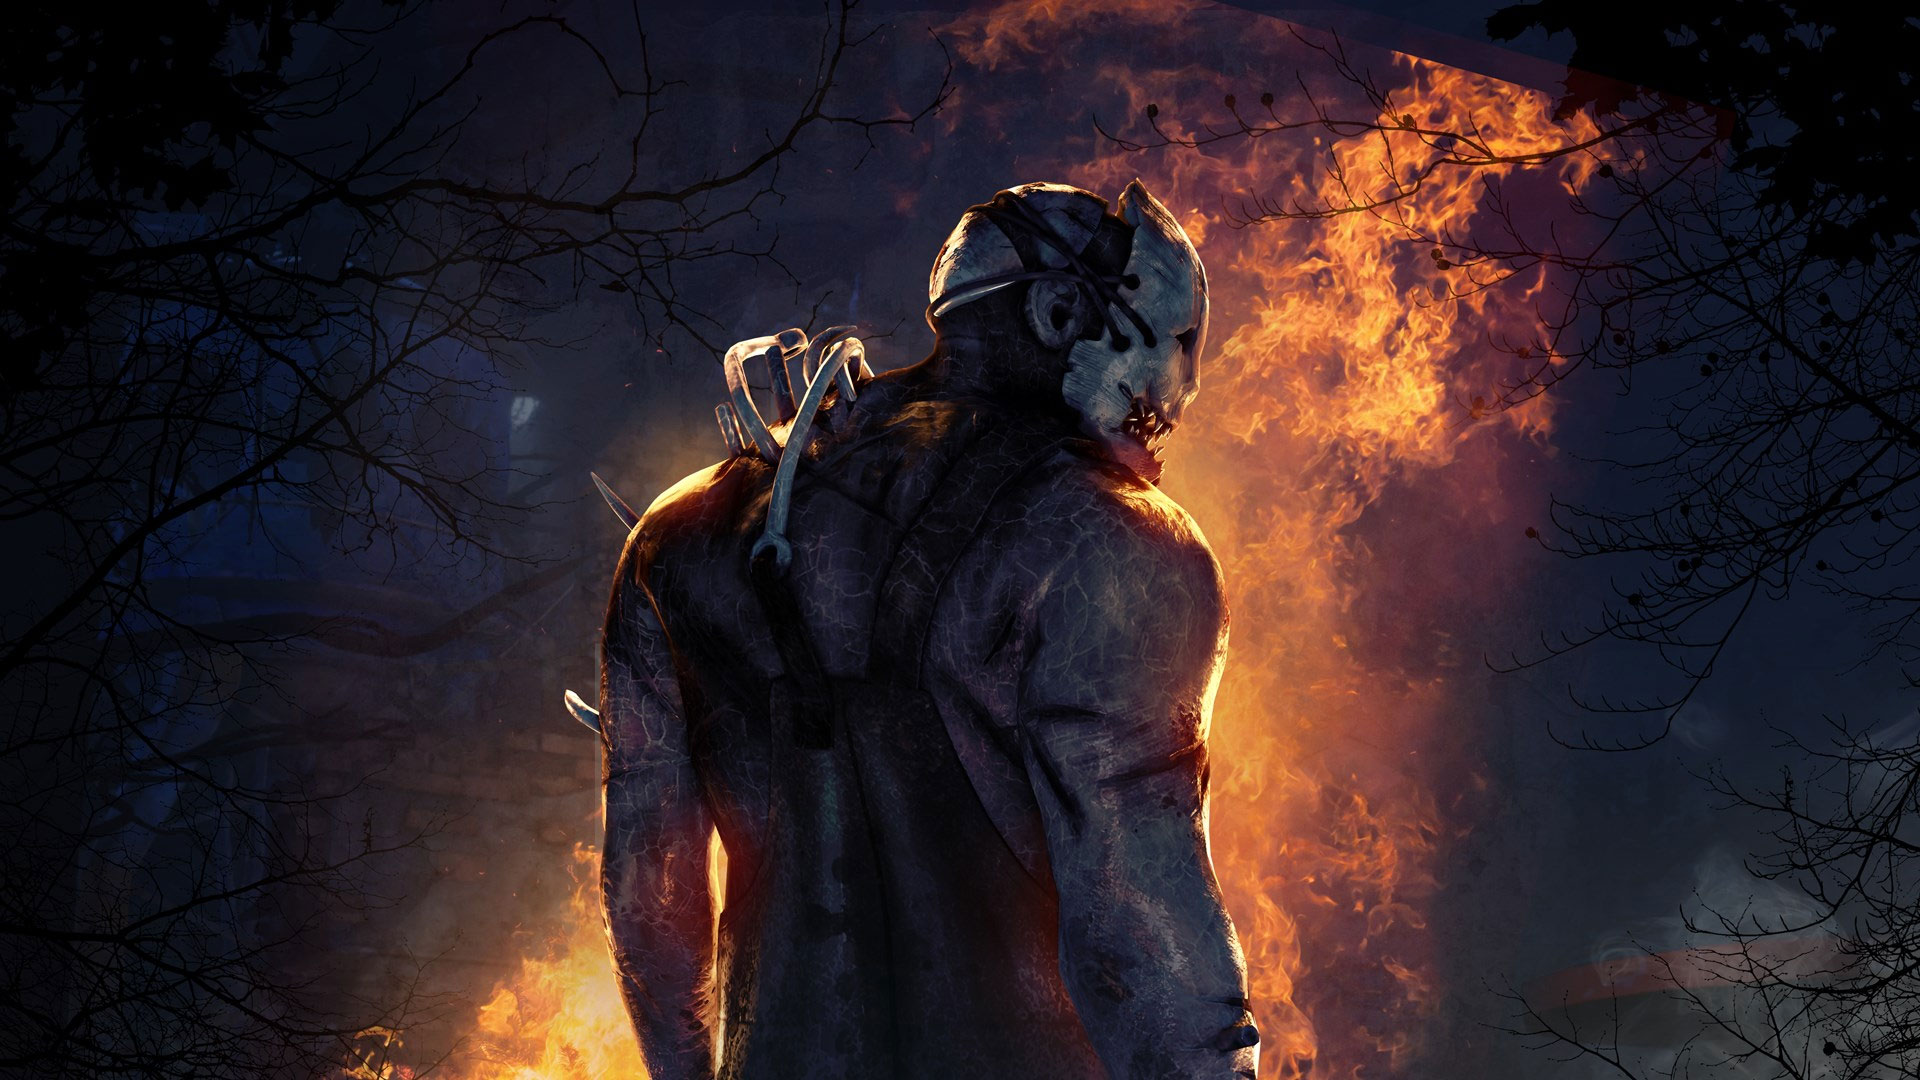 Hooked on You: A Dead by Daylight Dating Sim review - The title is